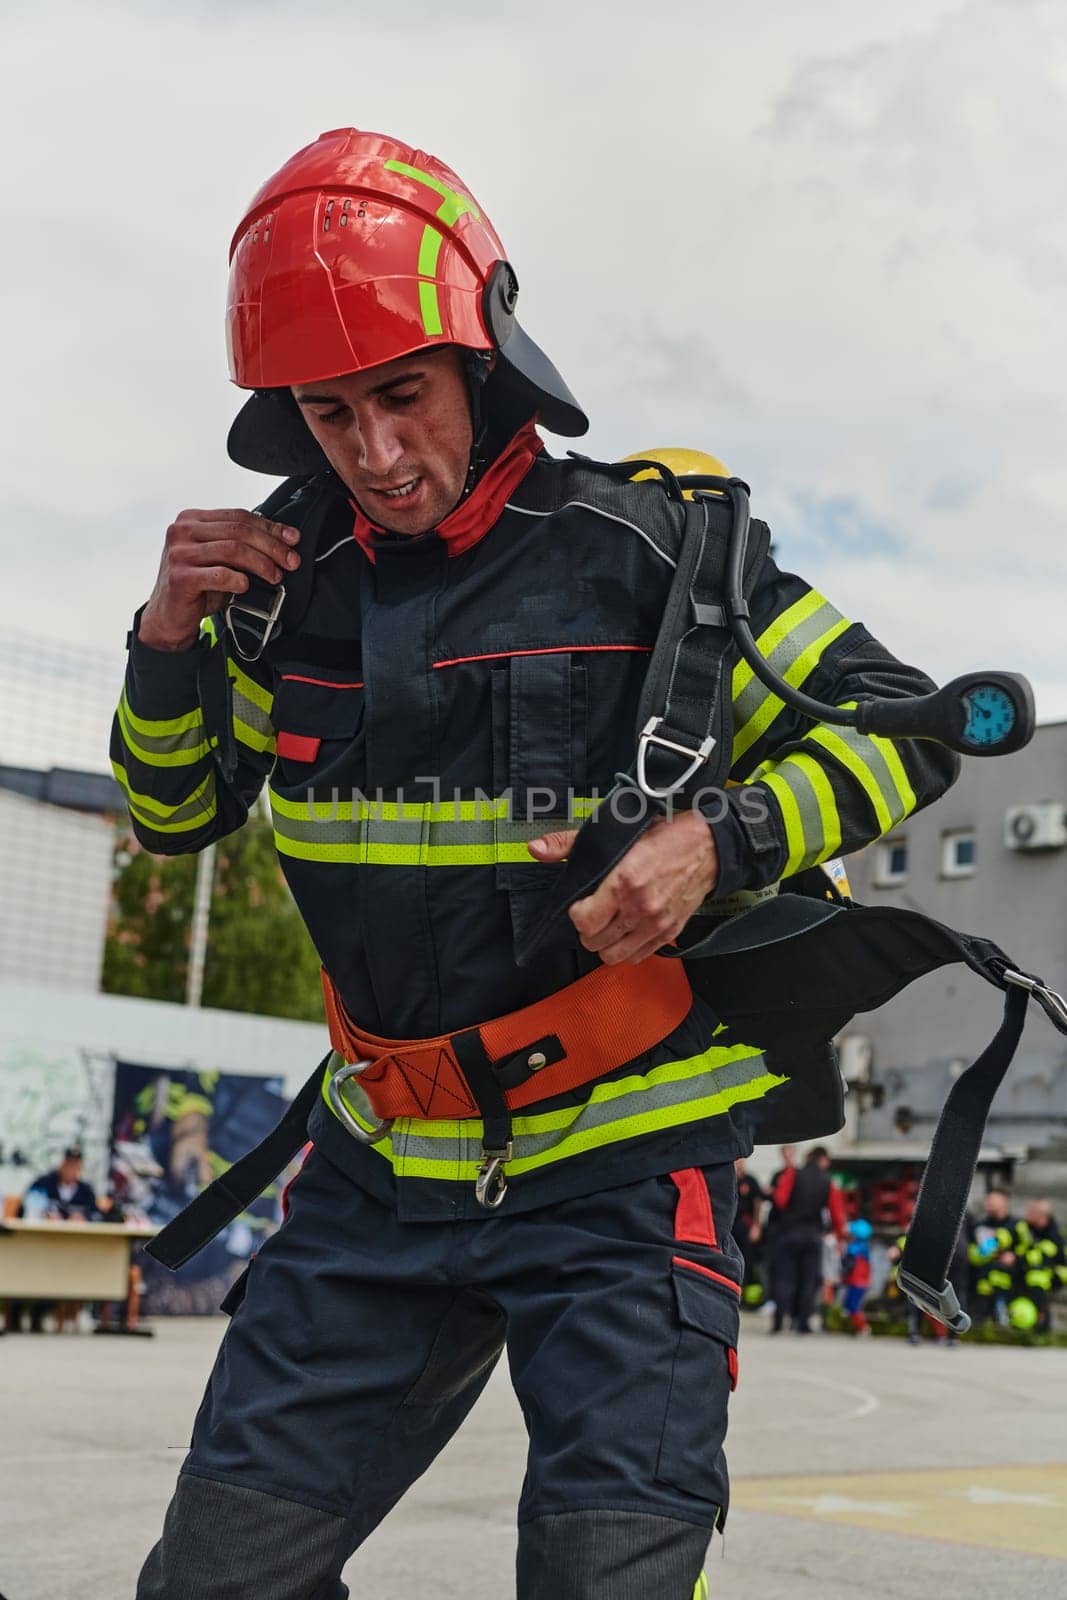 A professional firefighter dons his protective gear, preparing to respond to an emergency call.